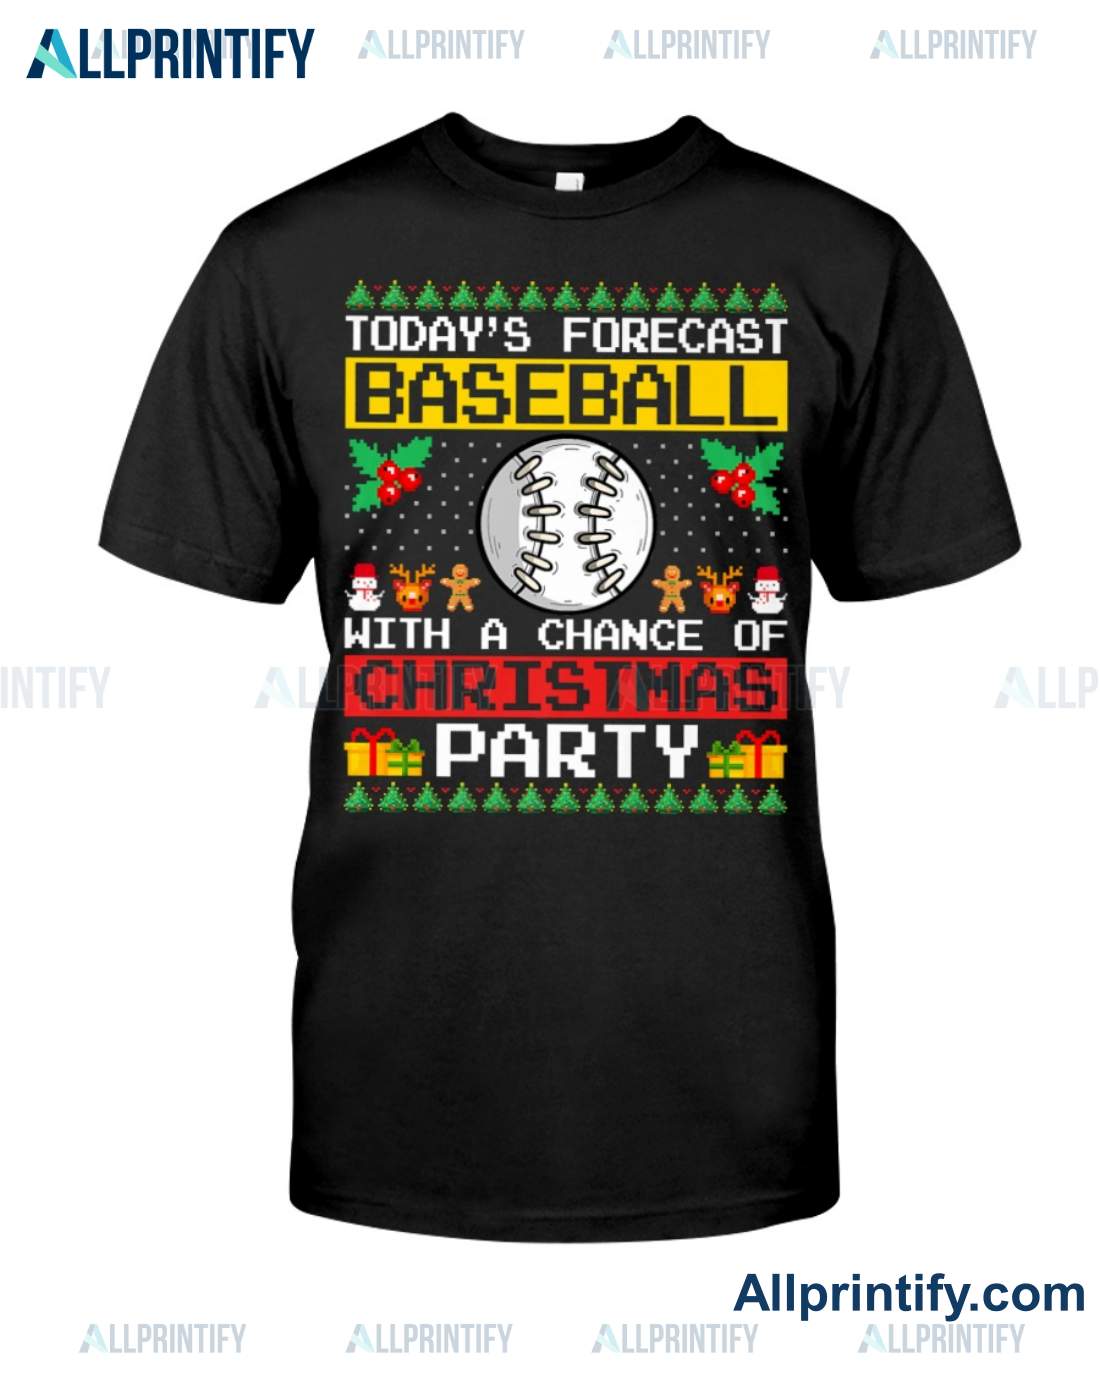 Today's Forecast Baseball With A Chance Of Christmas Party Shirt a